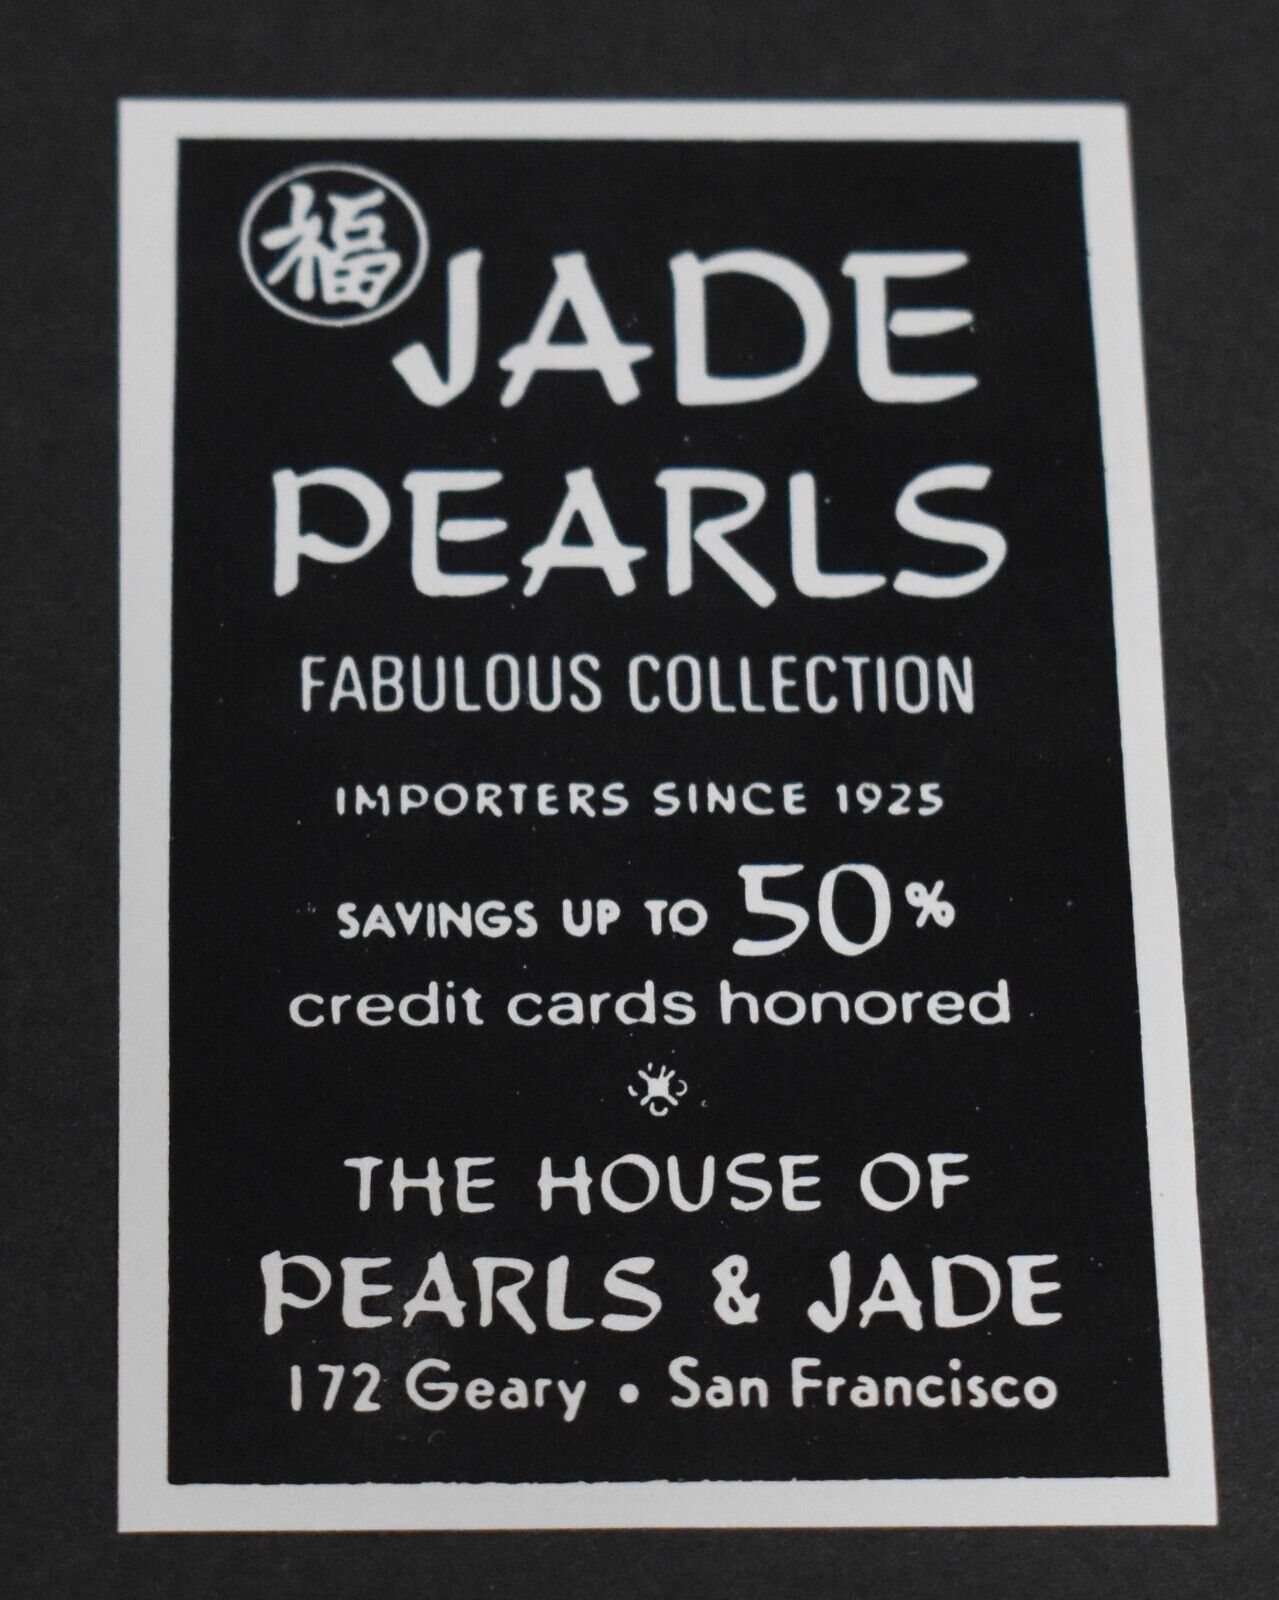 1969 Print Ad San Francisco The House of Pearls & Jade 172 Geary Importers art